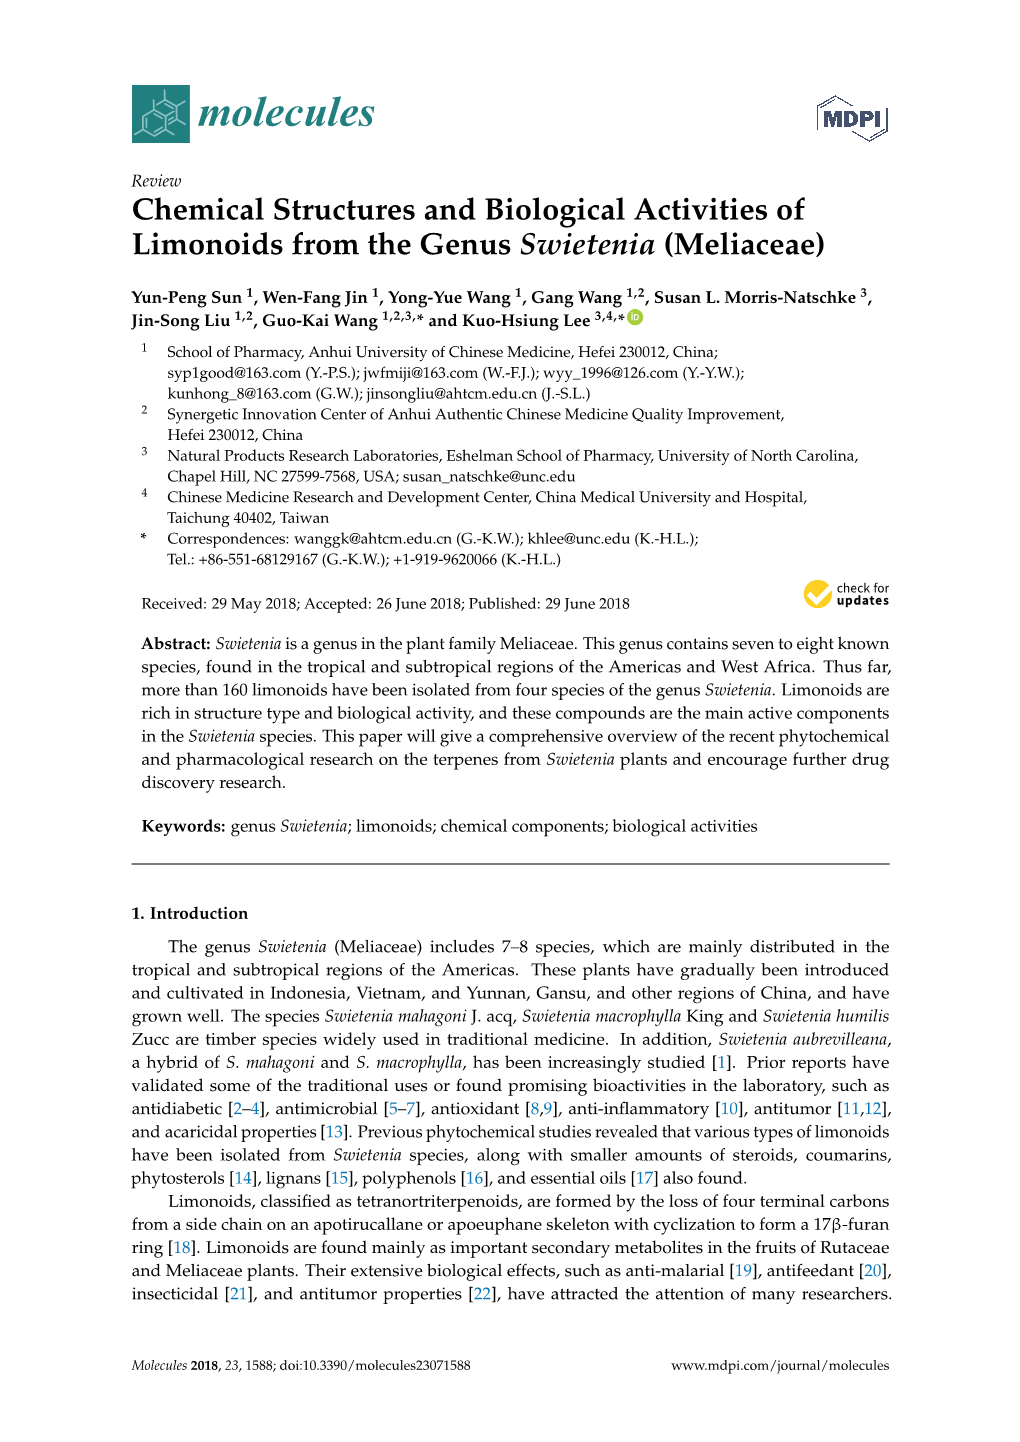 Chemical Structures and Biological Activities of Limonoids from the Genus Swietenia (Meliaceae)